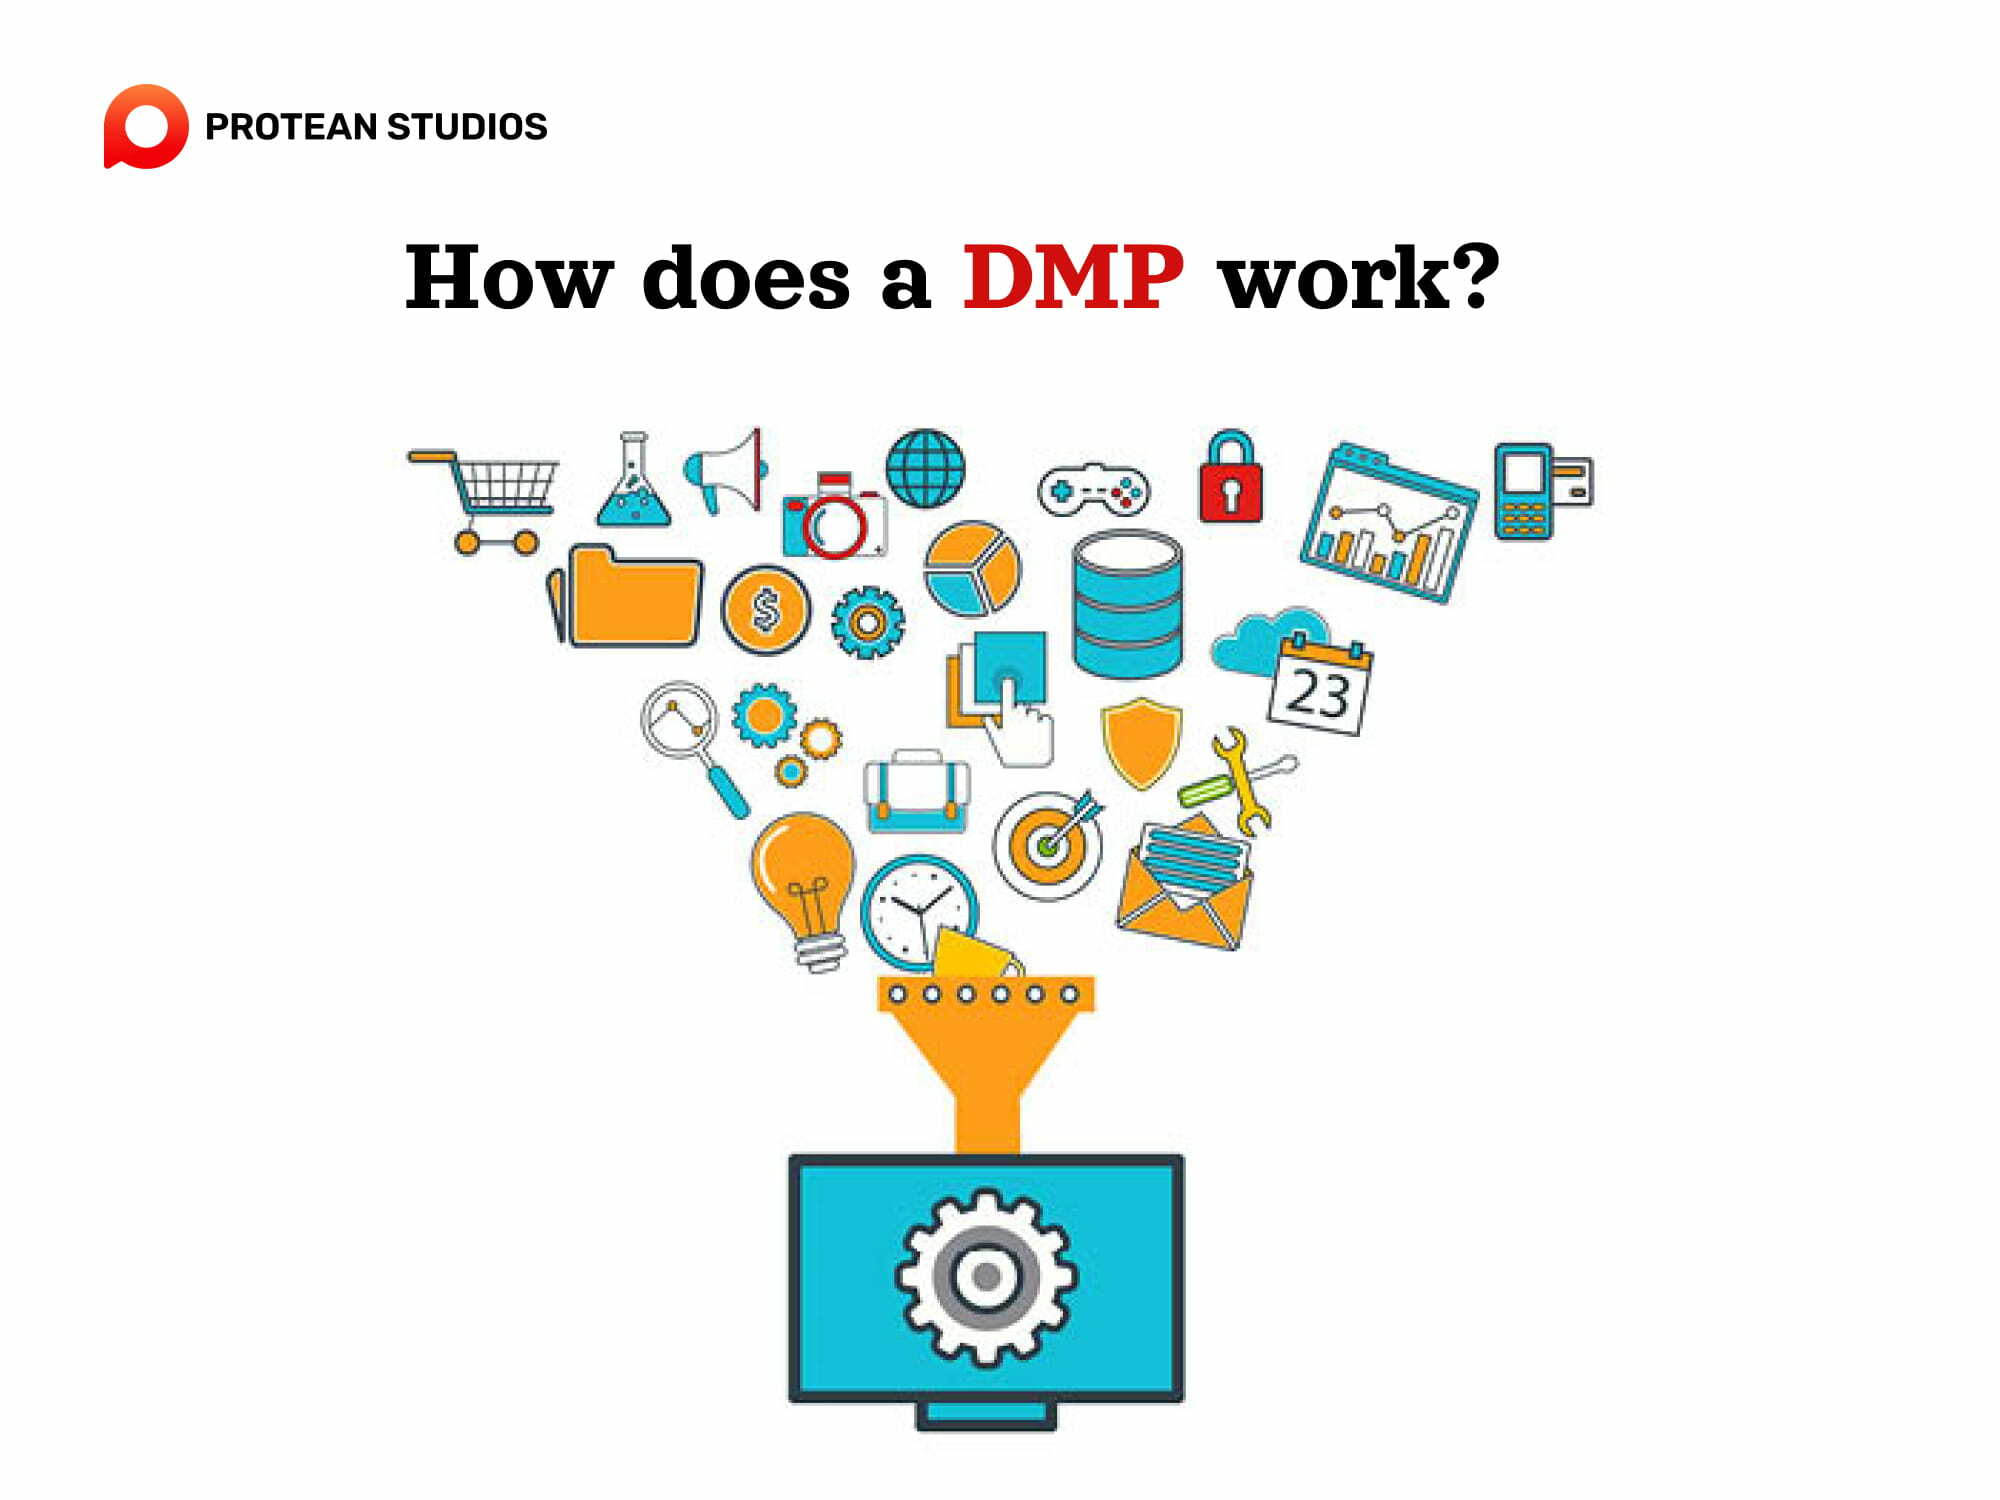 Features and ways DMP works